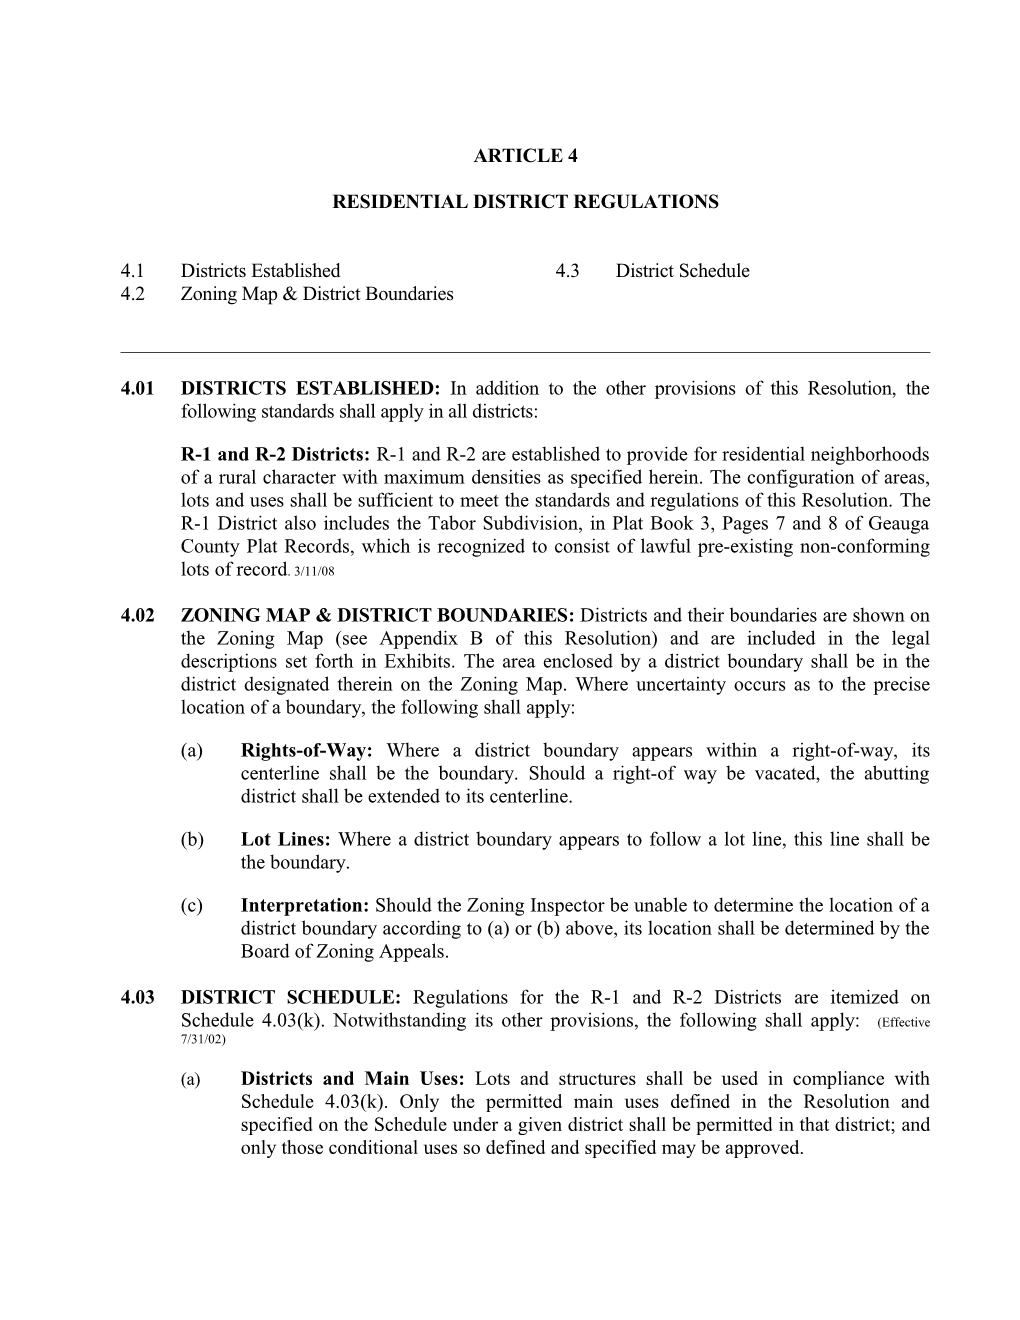 Residential District Regulations